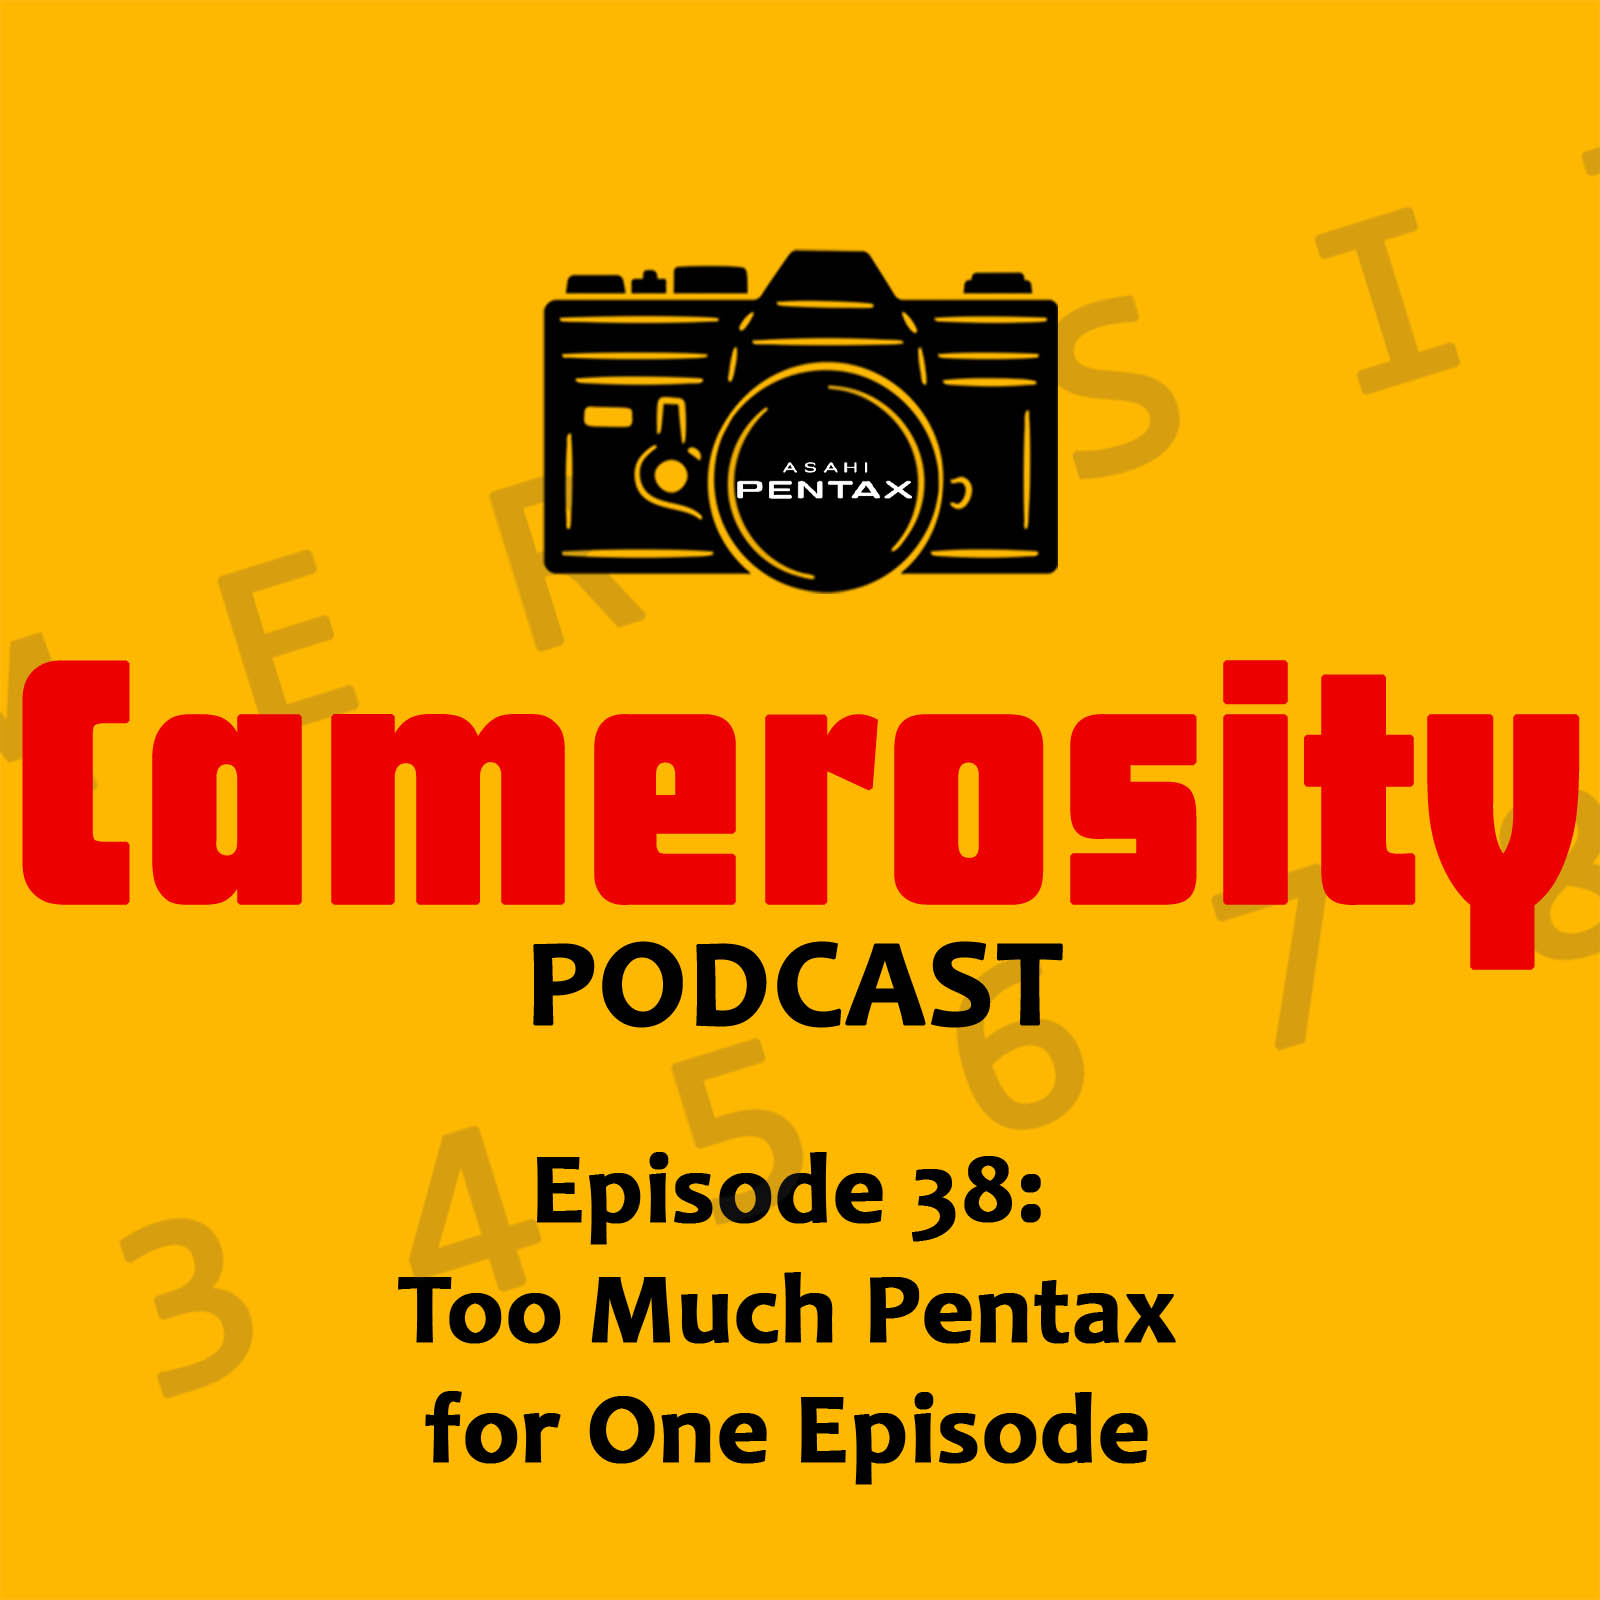 Episode 38: Too Much Pentax for One Episode